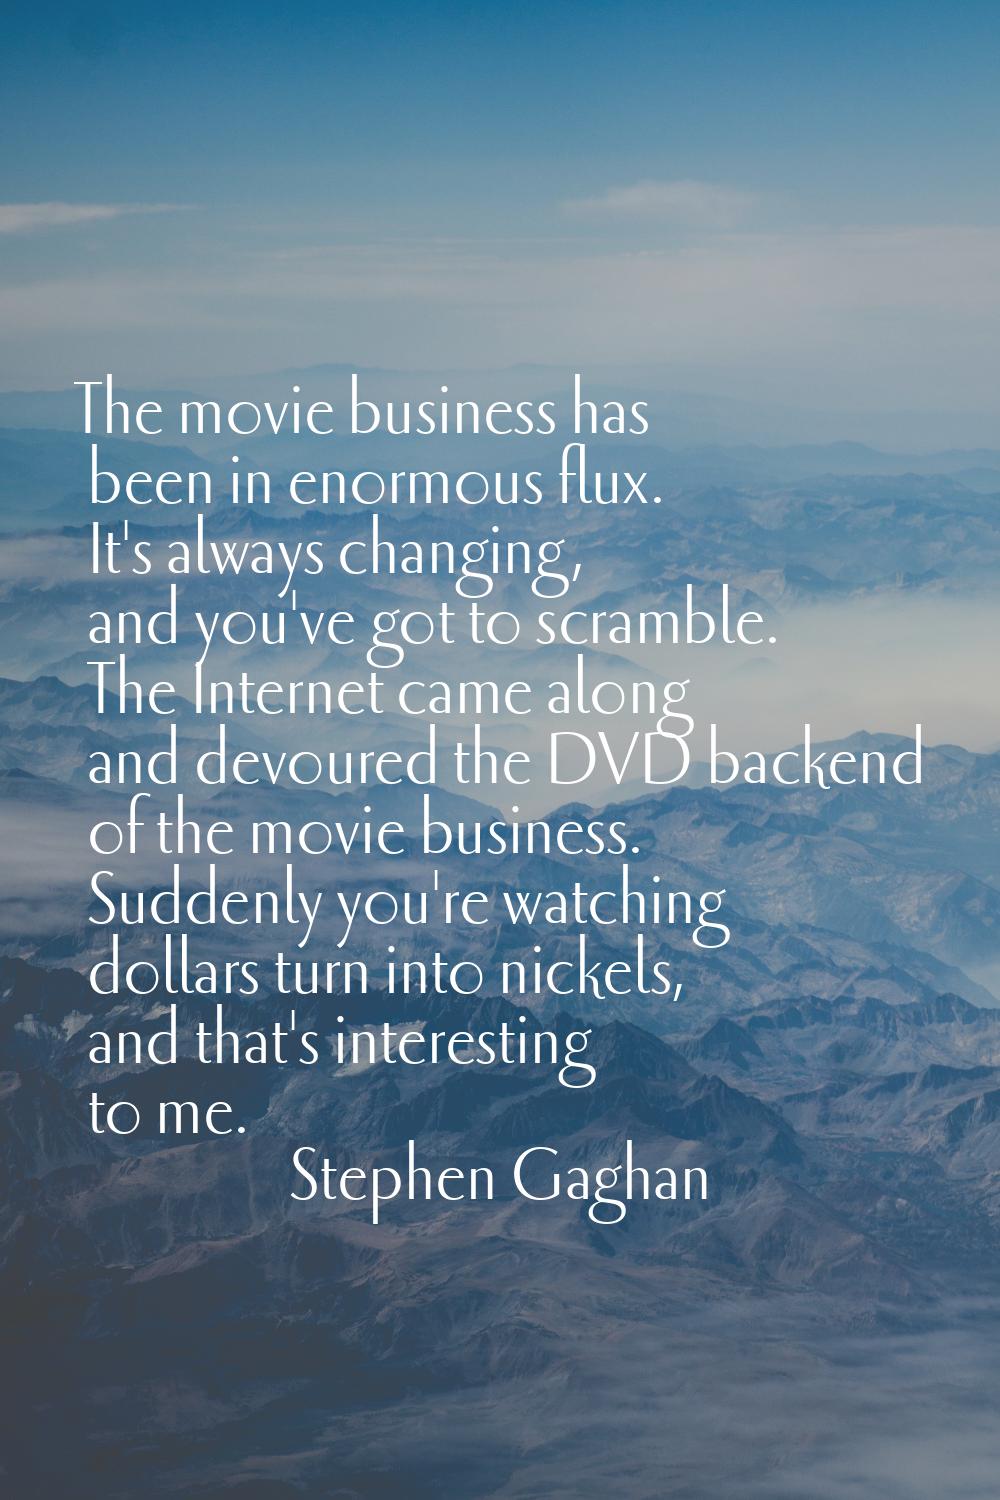 The movie business has been in enormous flux. It's always changing, and you've got to scramble. The